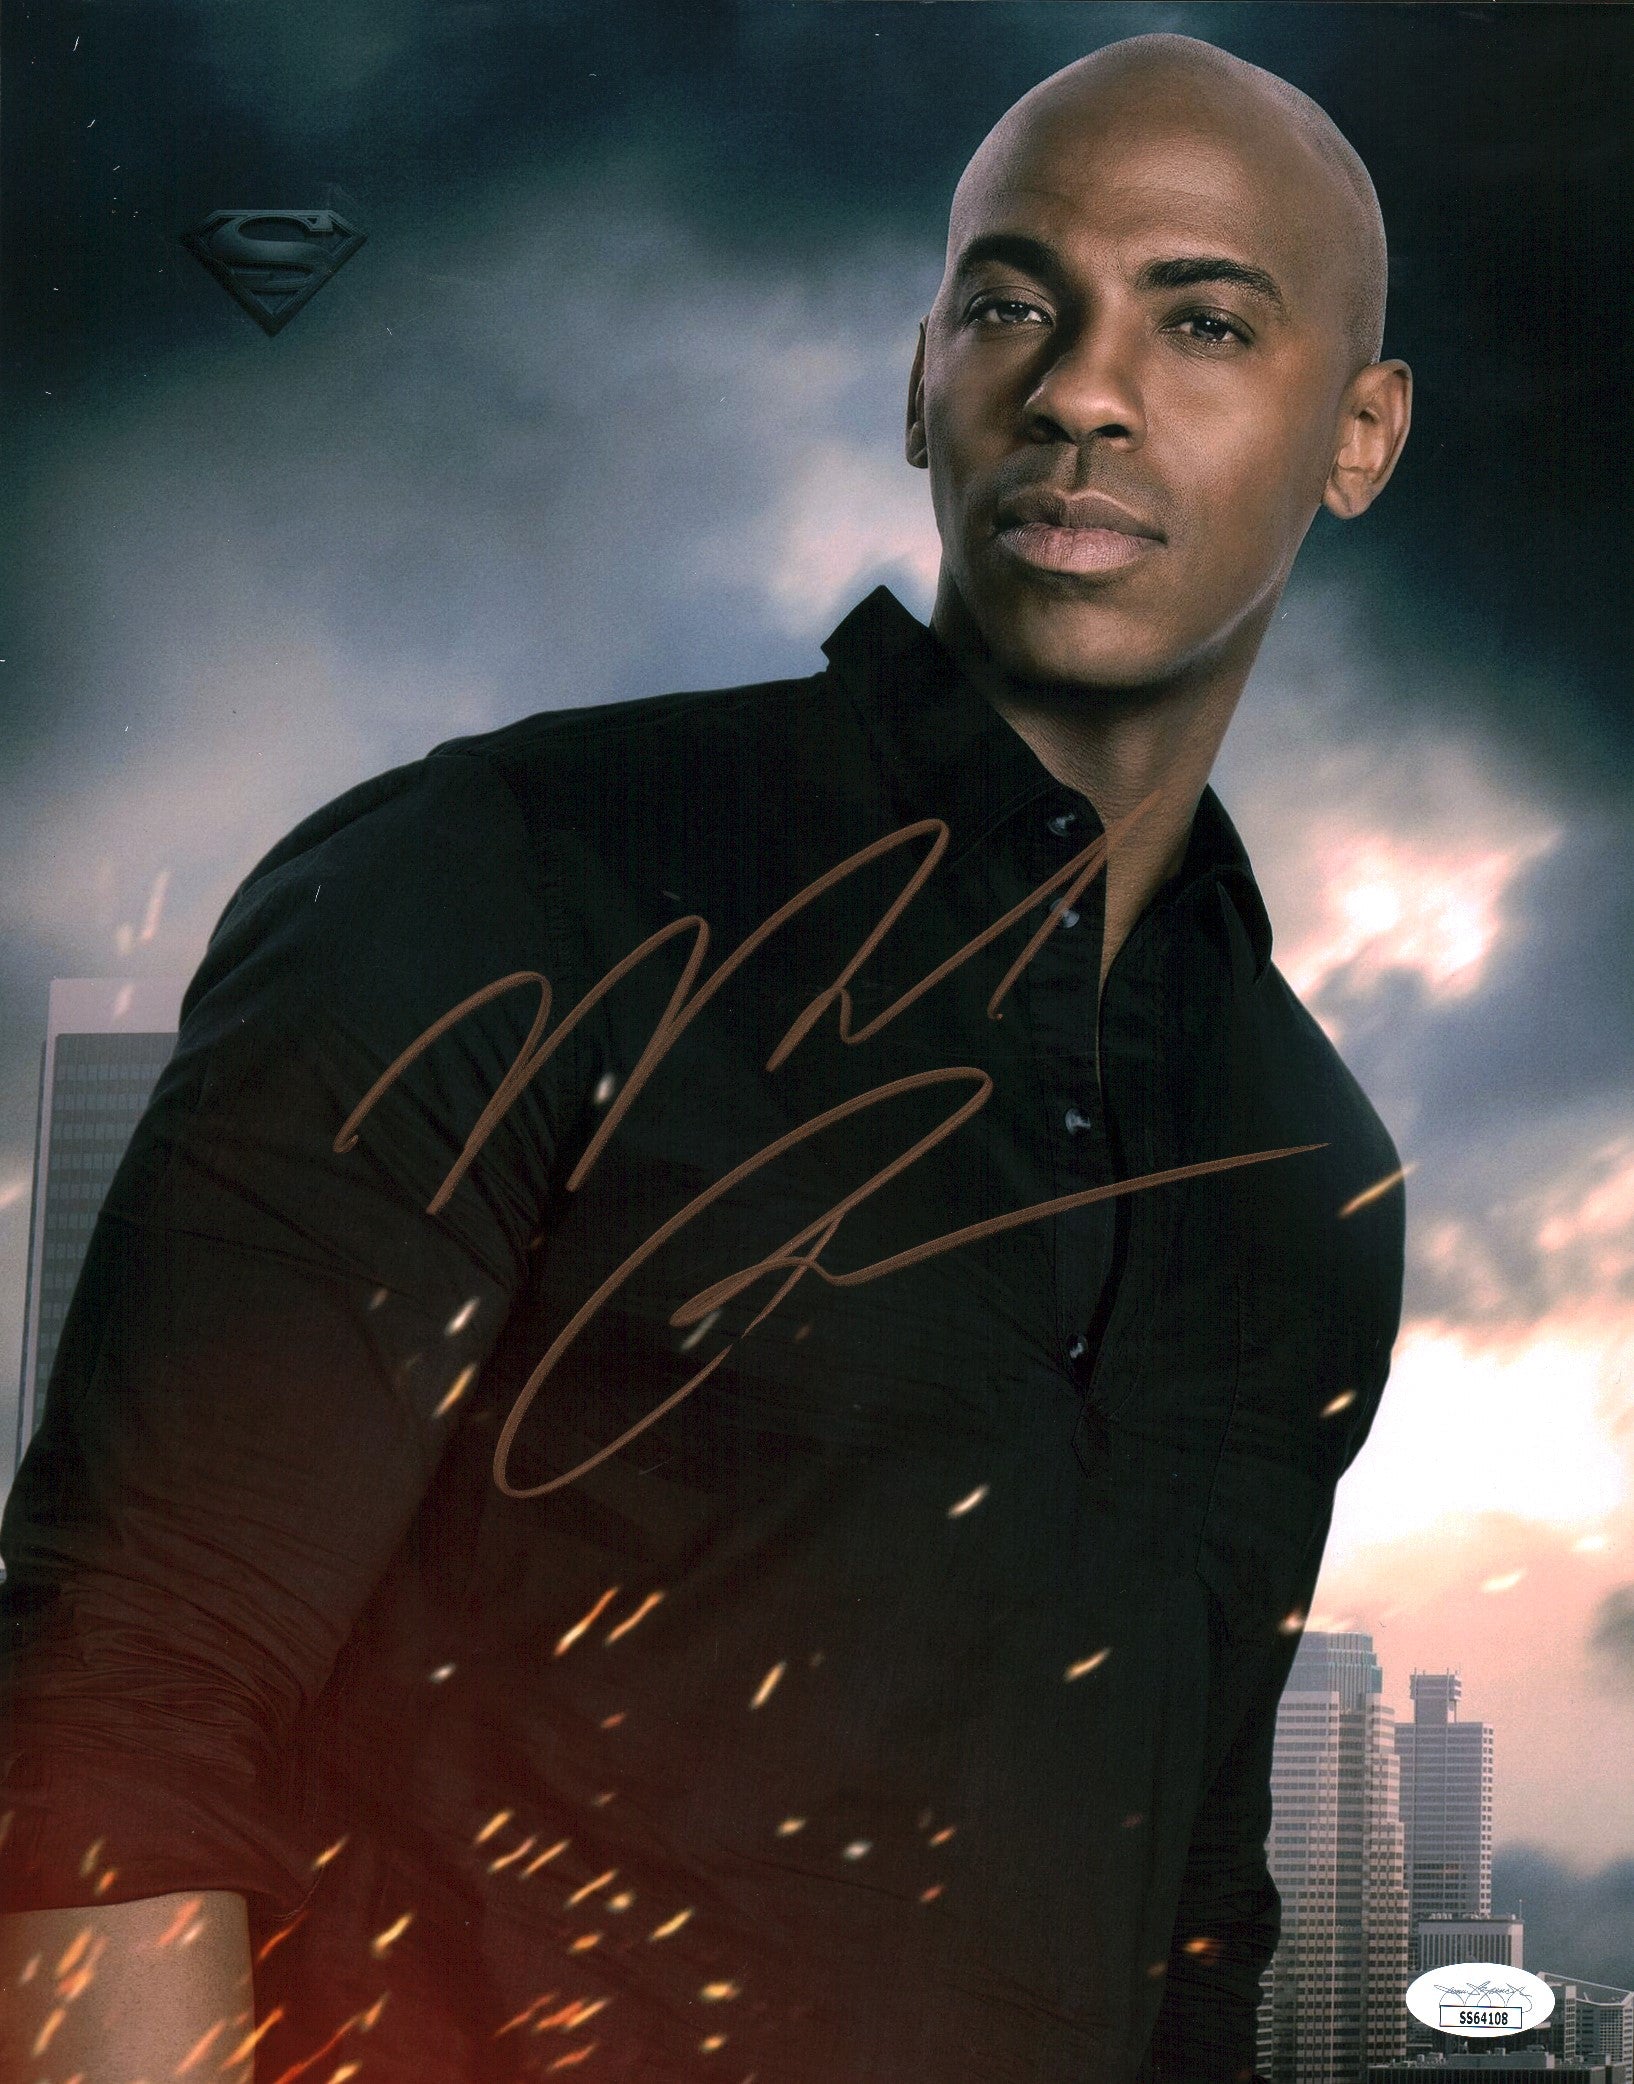 Mehcad Brooks Supergirl 11x14 Photo Poster Signed Autograph JSA Certified